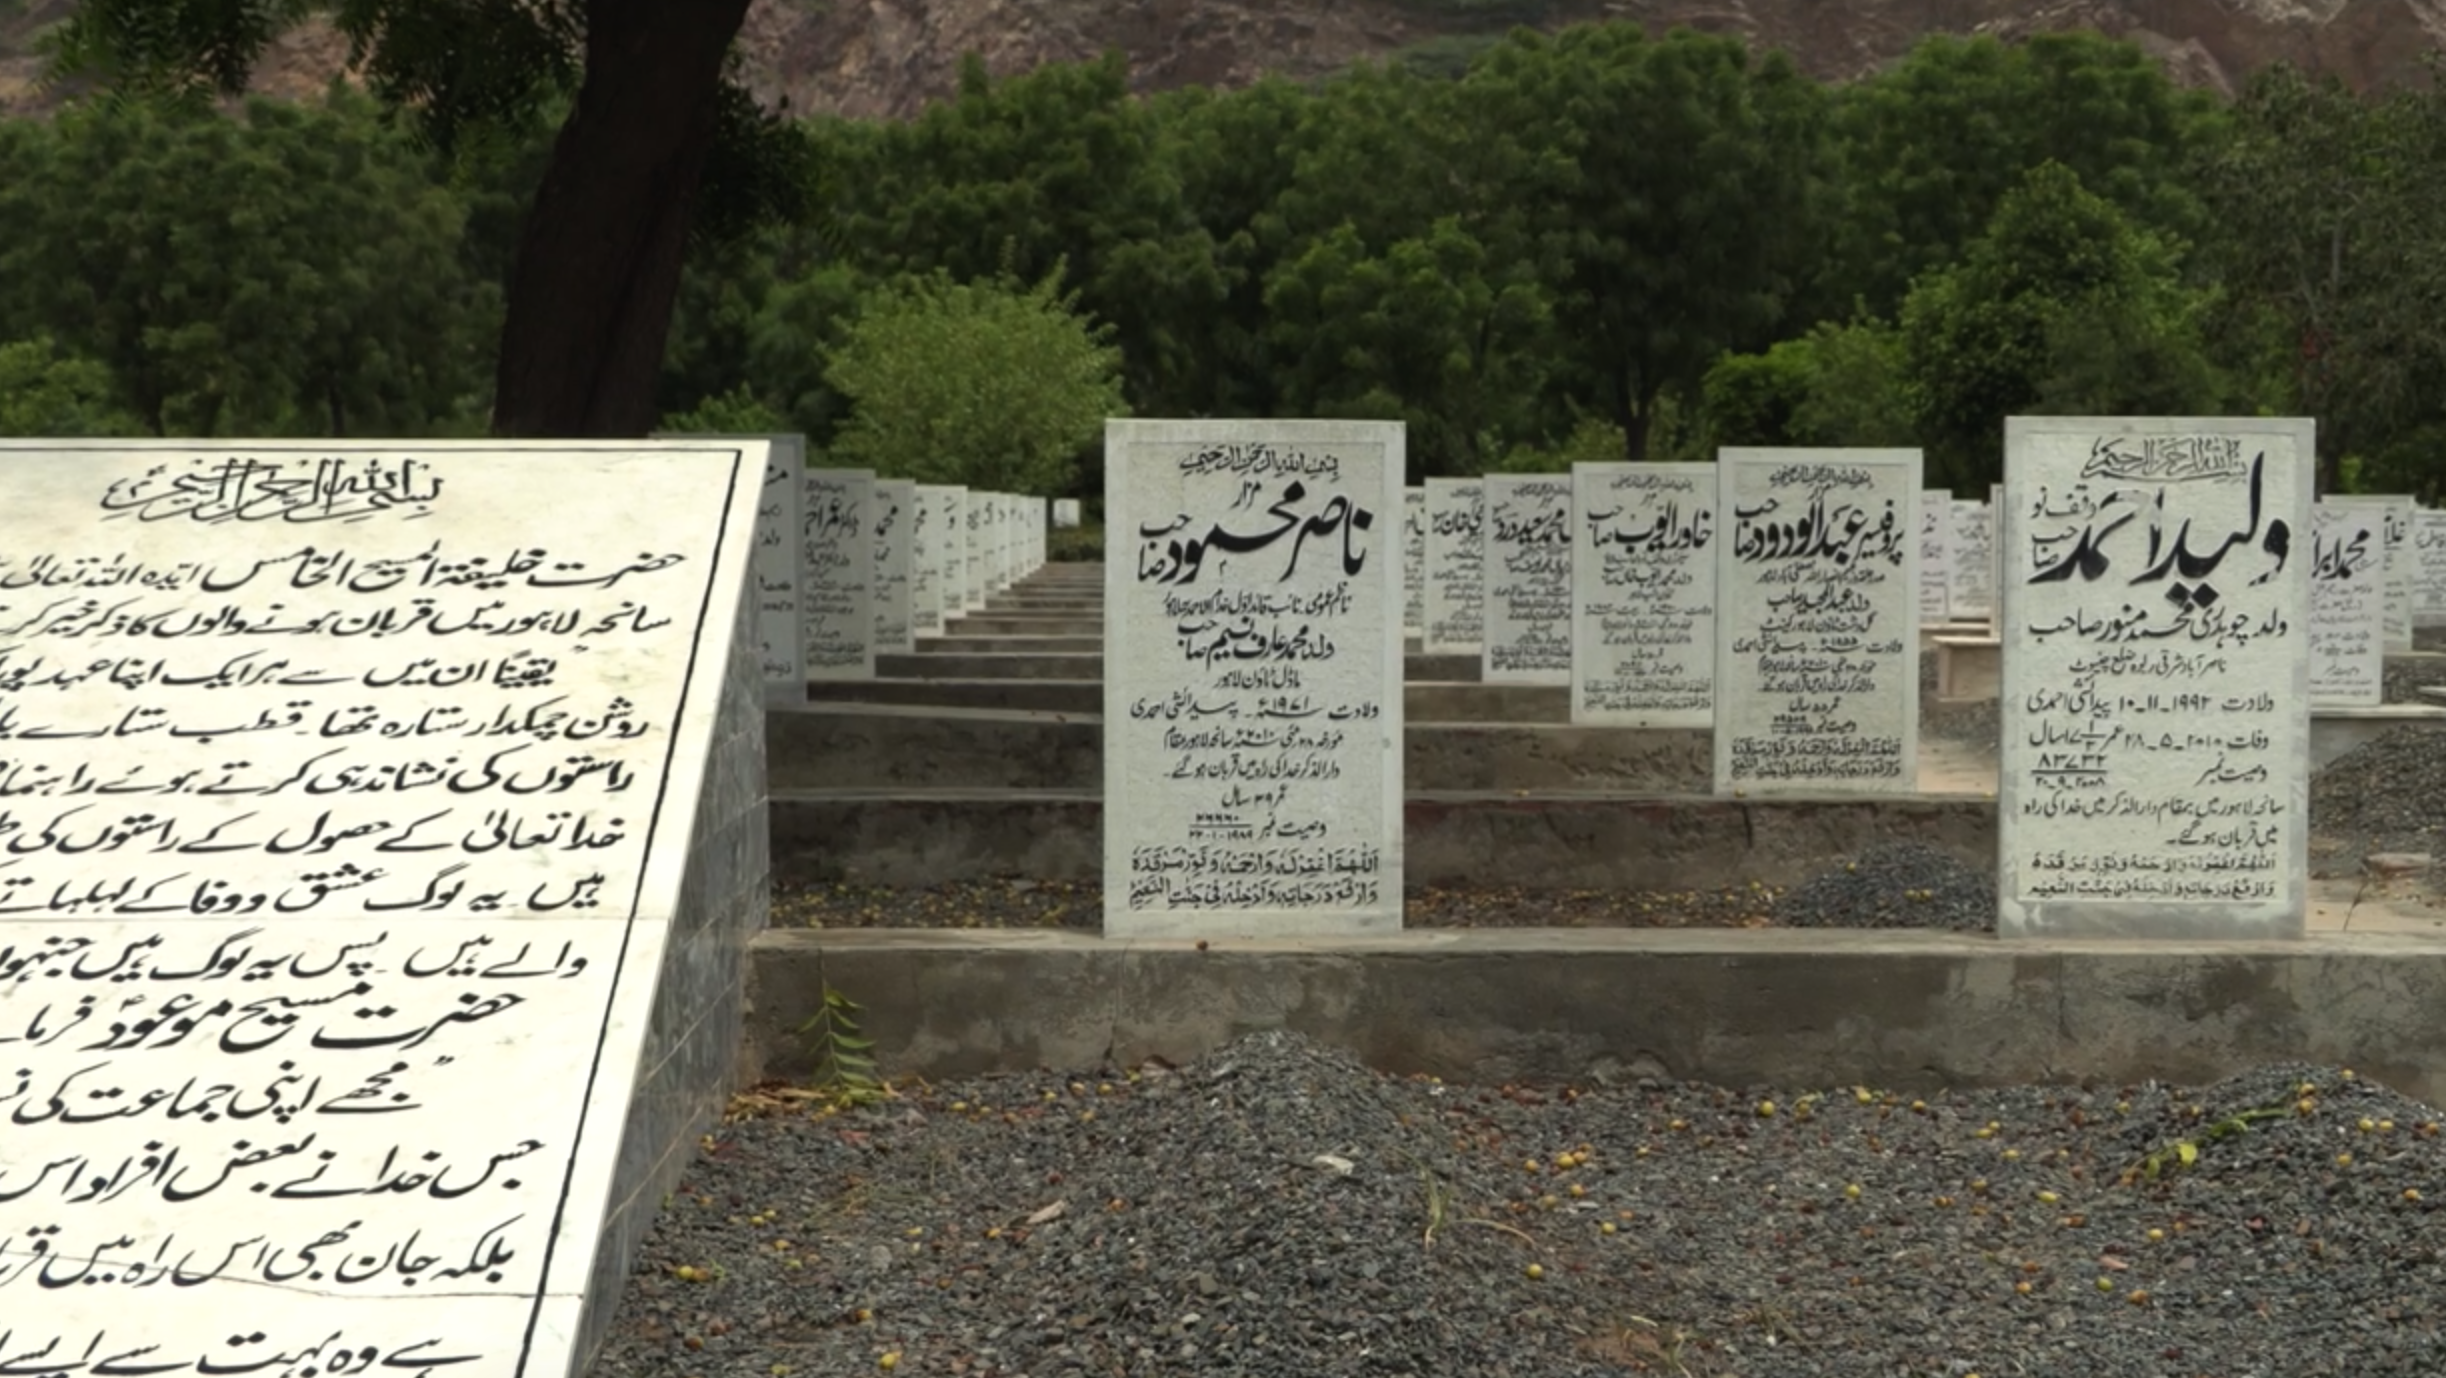 By the directive of the founder of the Ahmadiyya community, Mirza Ghulam Ahmad, anyone who wishes to be buried in the Bahishti Maqbara cemetery must contribute to the maintenance of the cemetery and must also bequeath some of their property to carry on the teachings of Islam. Image by Isabella Palma Lopez. Pakistan, 2018.